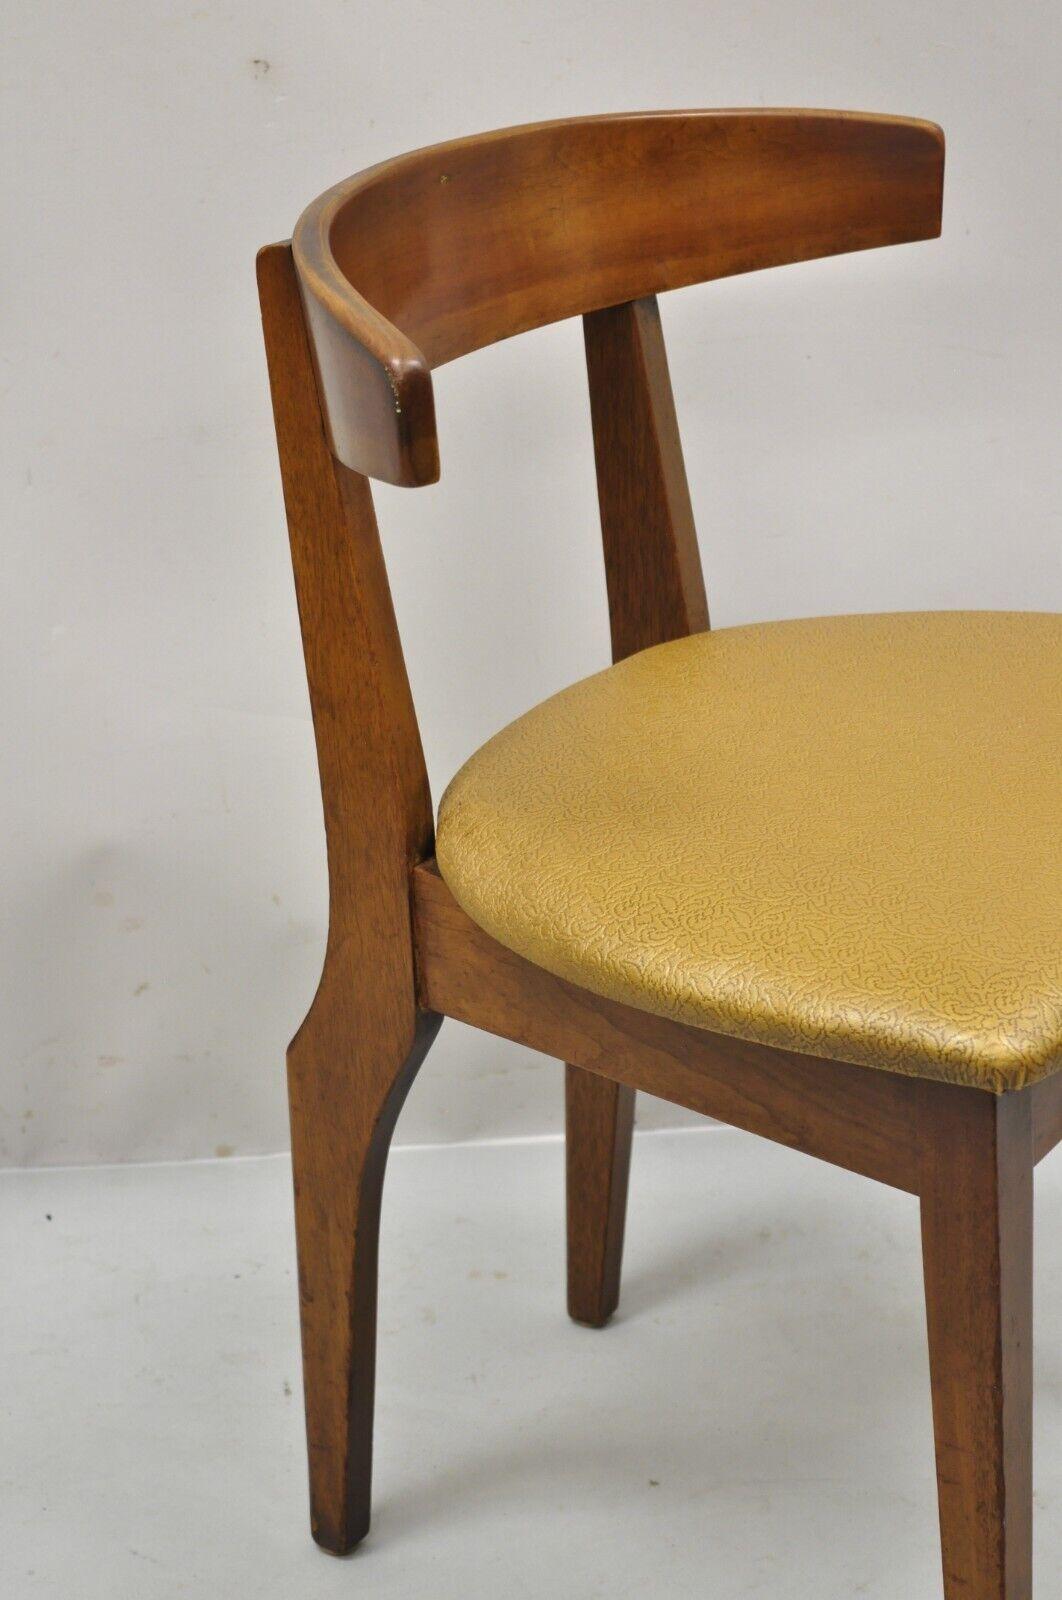 American Mid-Century Modern Cherry Wood Curved Back Hoof Leg Dining Side Chair For Sale